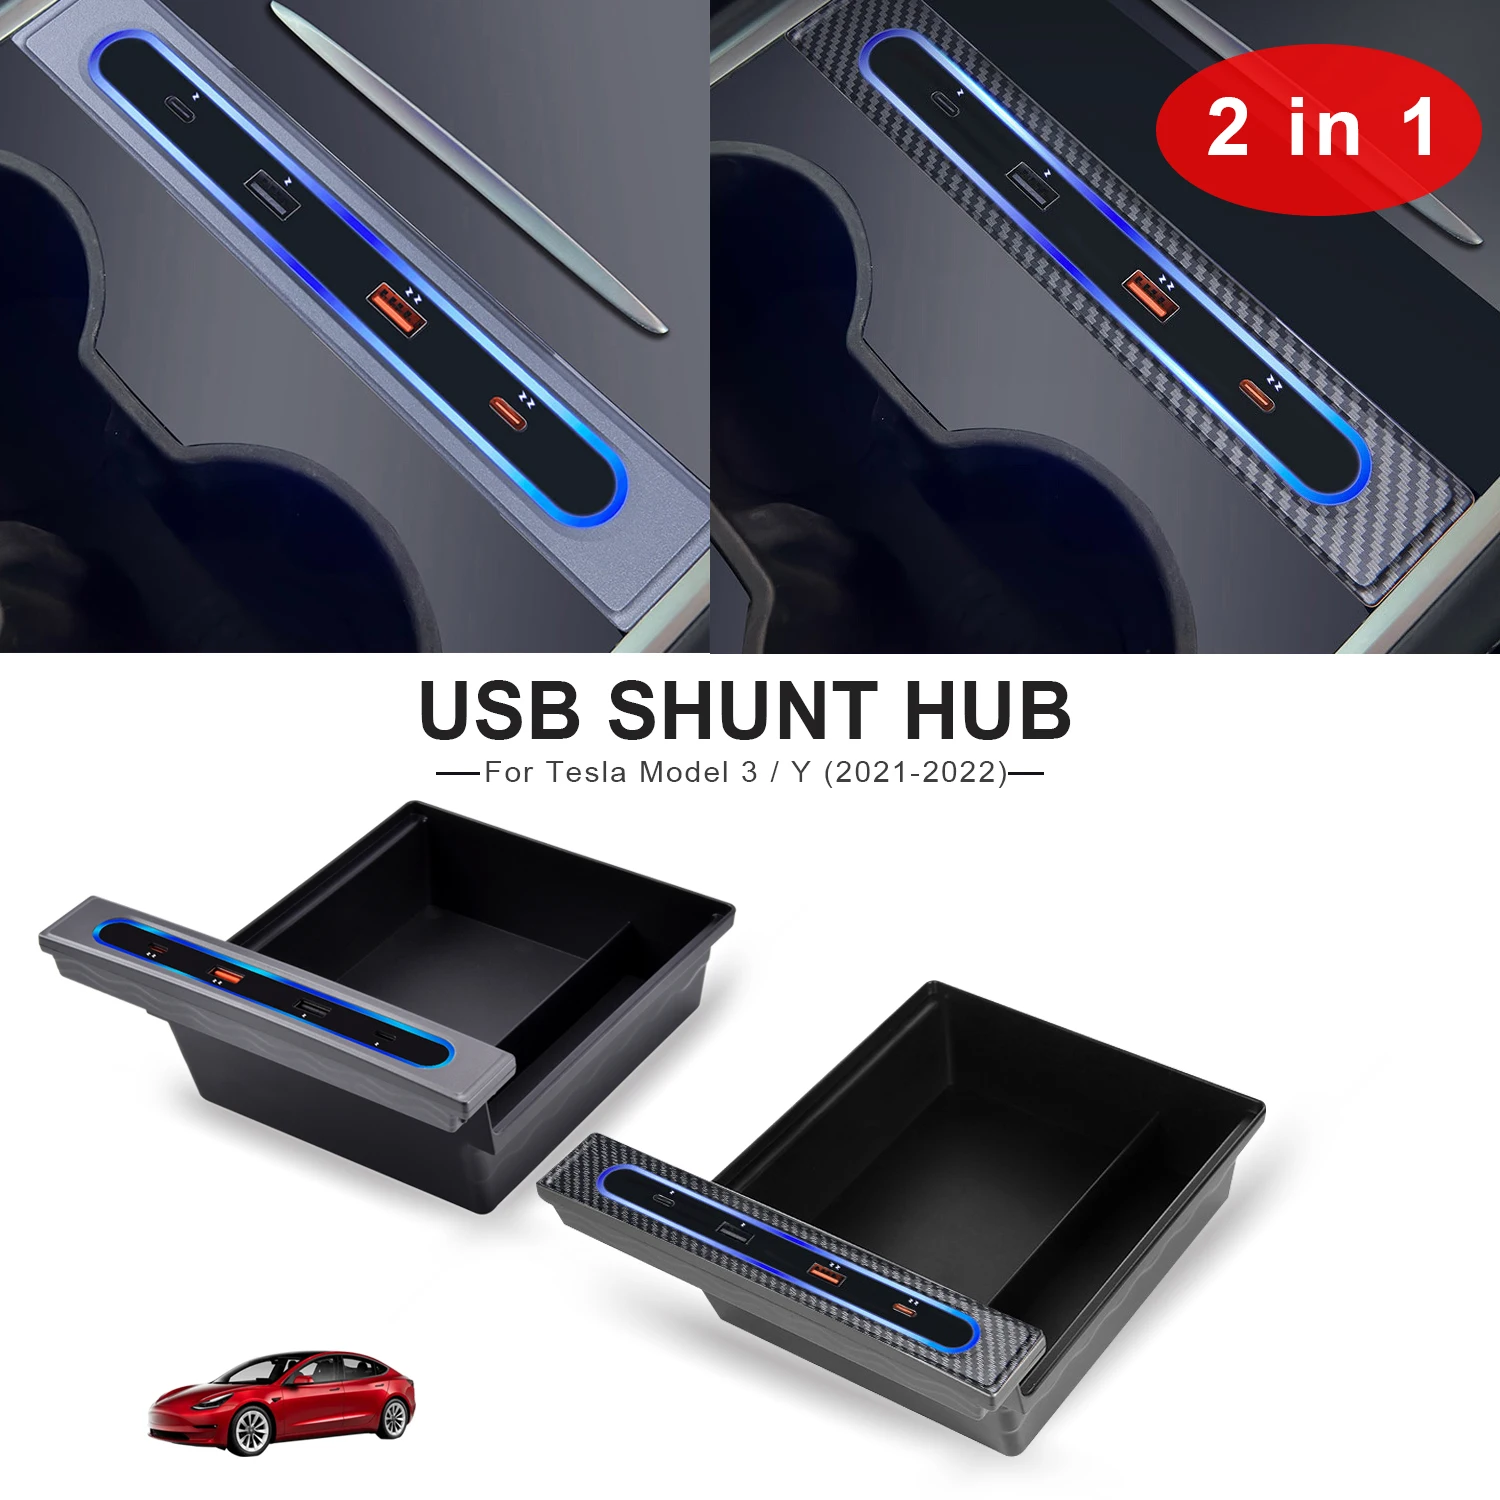 

For Tesla Model 3 Y 21-22 27W Quick Charger Docking Station 모델3 모델y USB LED Shunt Hub Extension With Center Console Storage Box